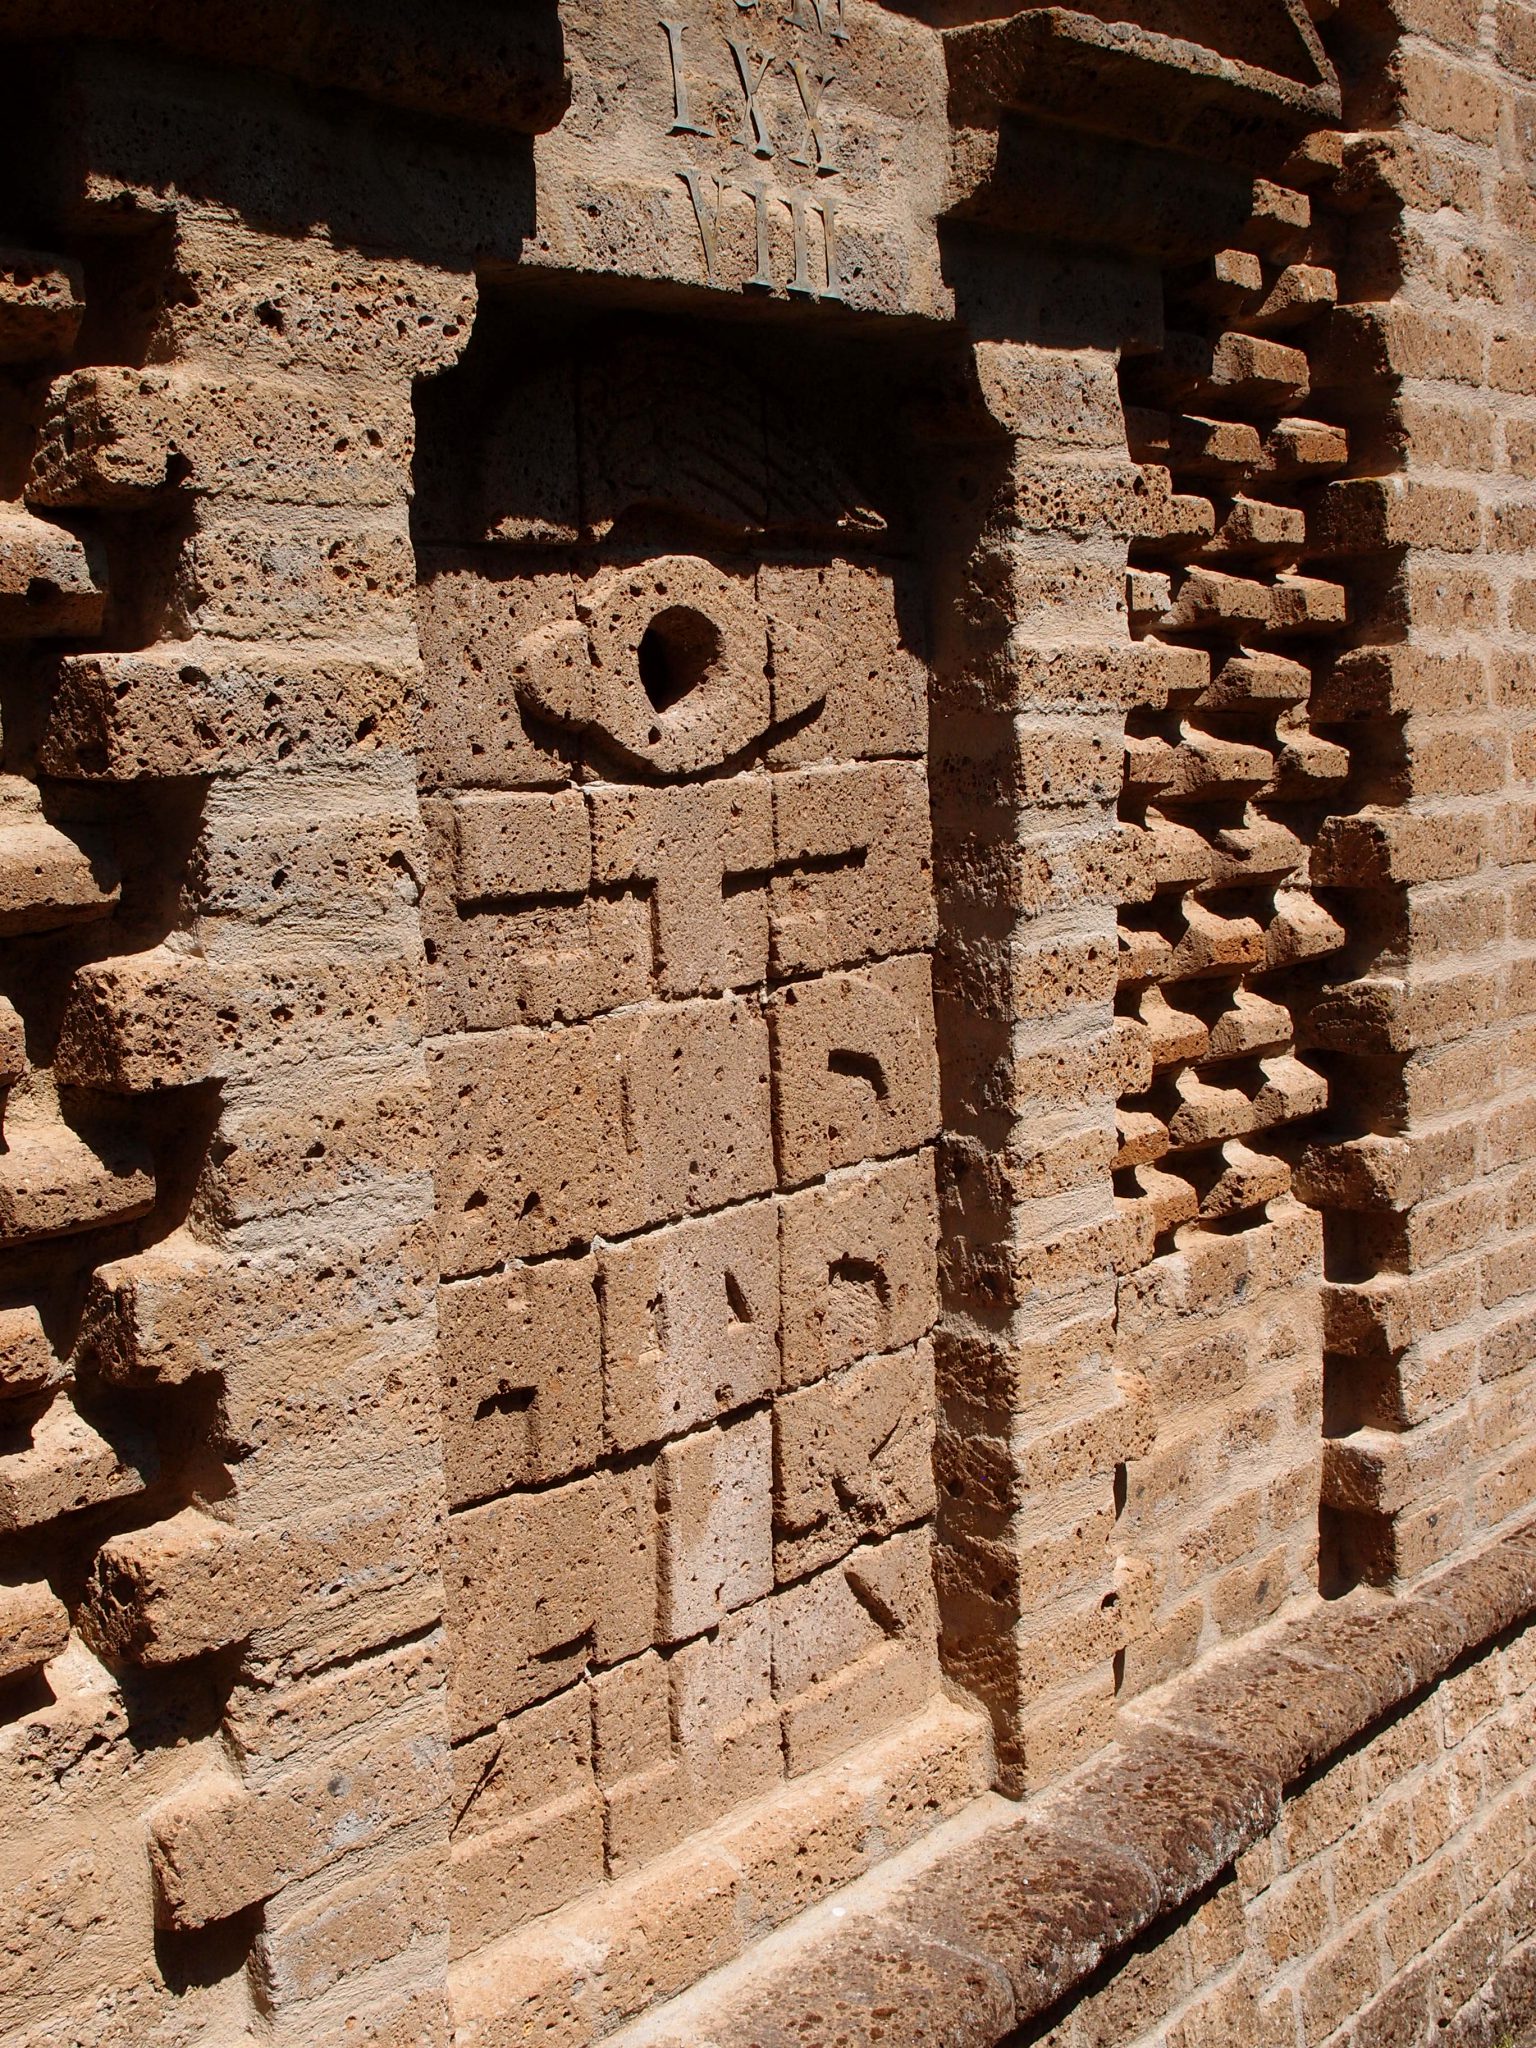 Walls usually have Ears. Buzzi’s walls have EYES. This City Wall detail shows how humble building materials—roughly-fashioned blocks and bricks---have been ingeniously assembled to form intricate, shadow-casting patterns. 